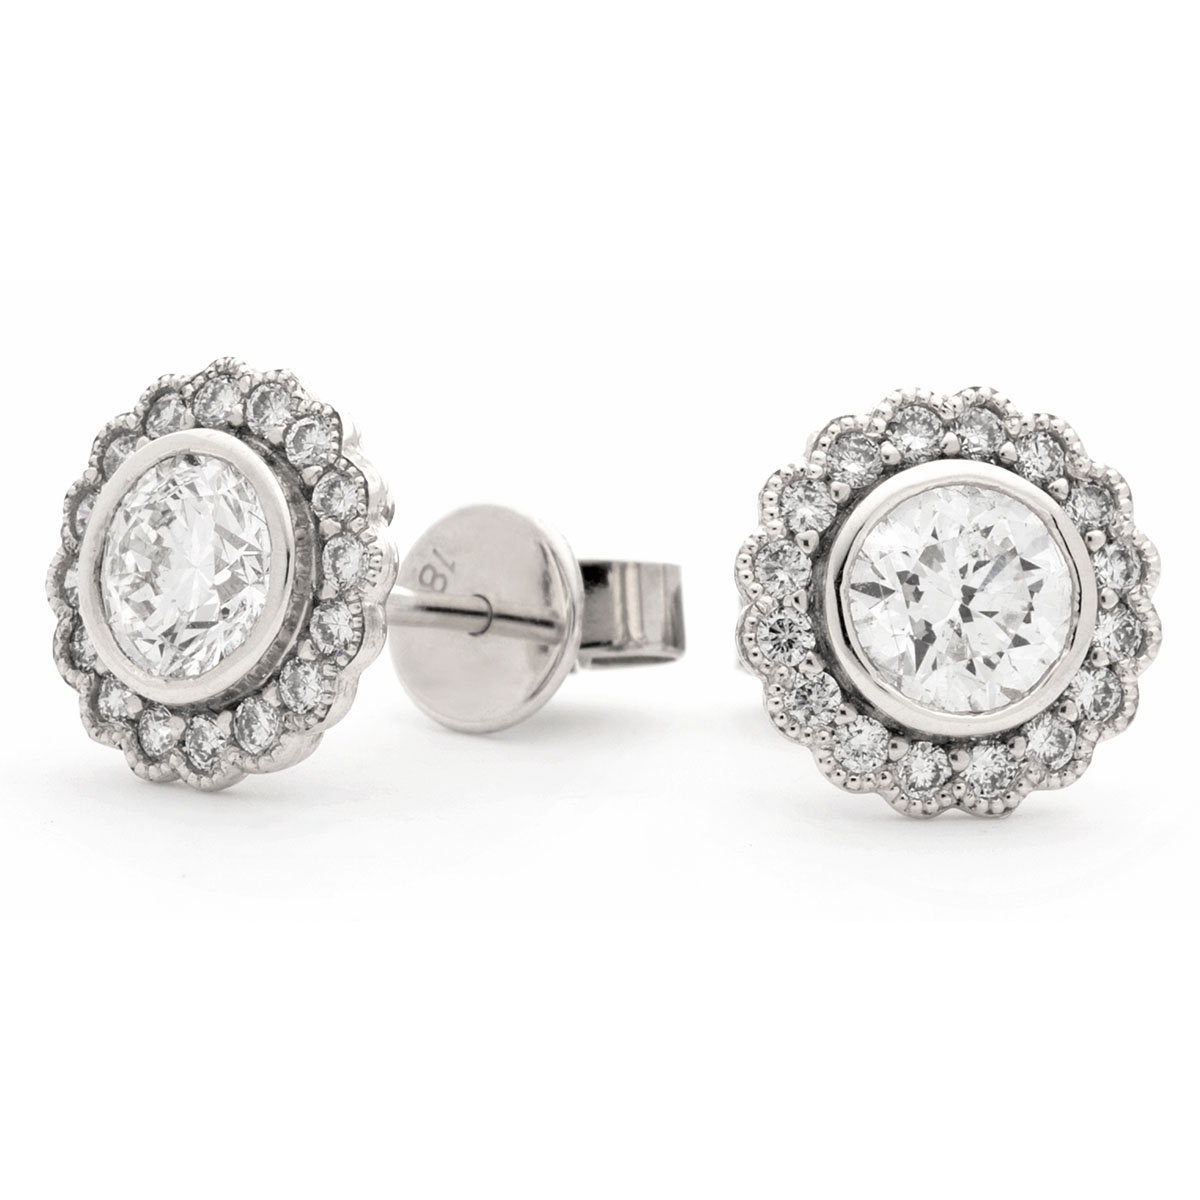 Rubover Rounded Halo Diamond Earring Studs